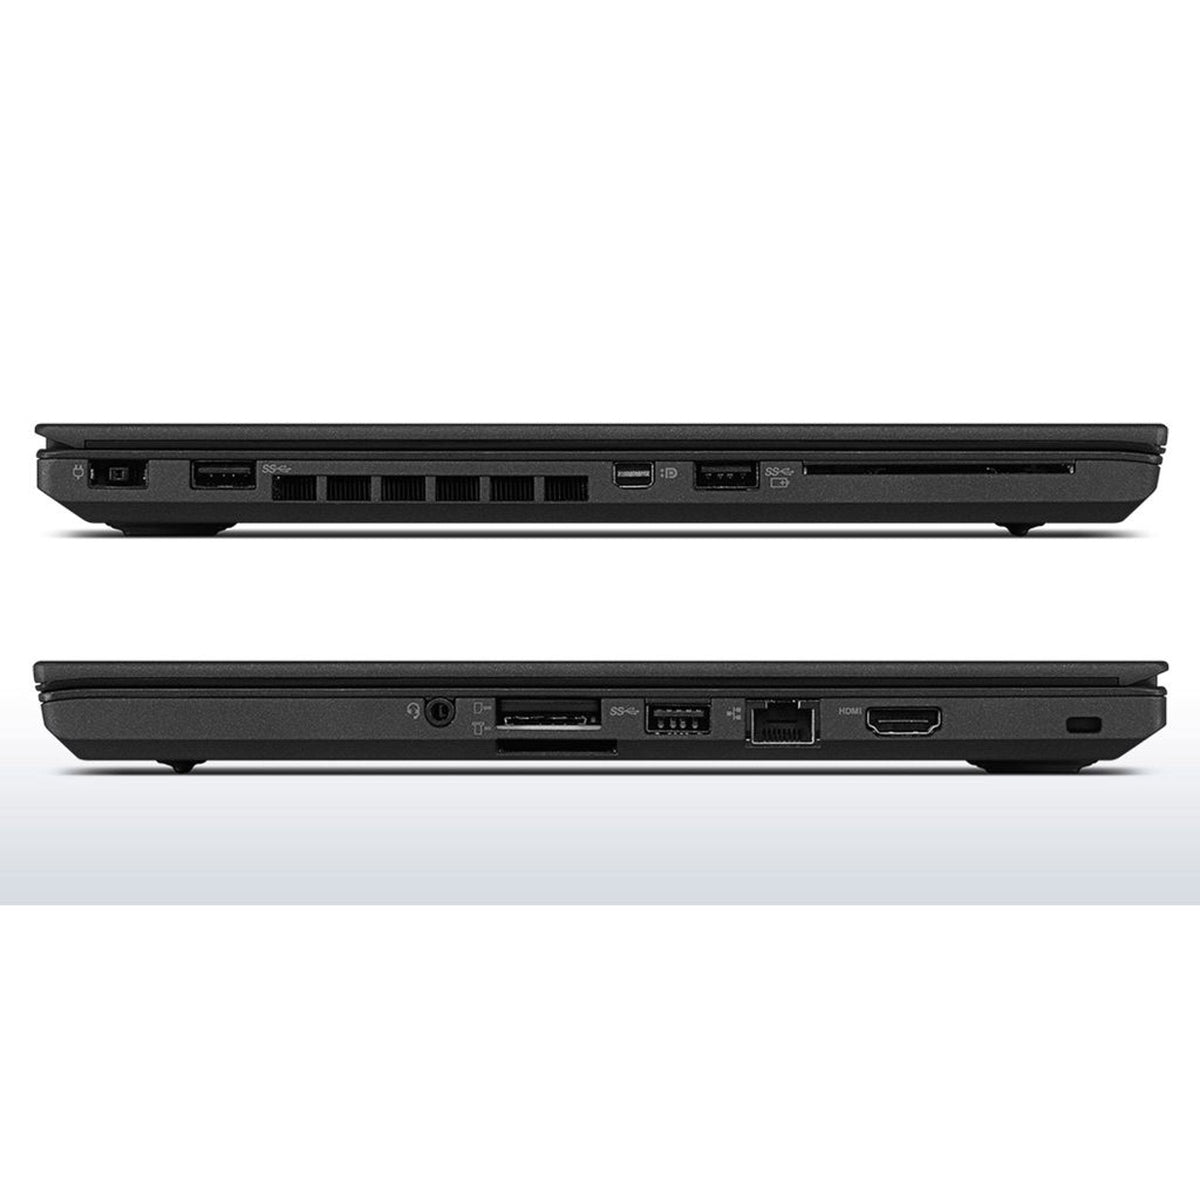 Discount PC - left and right side views of Lenovo T460 - Ports